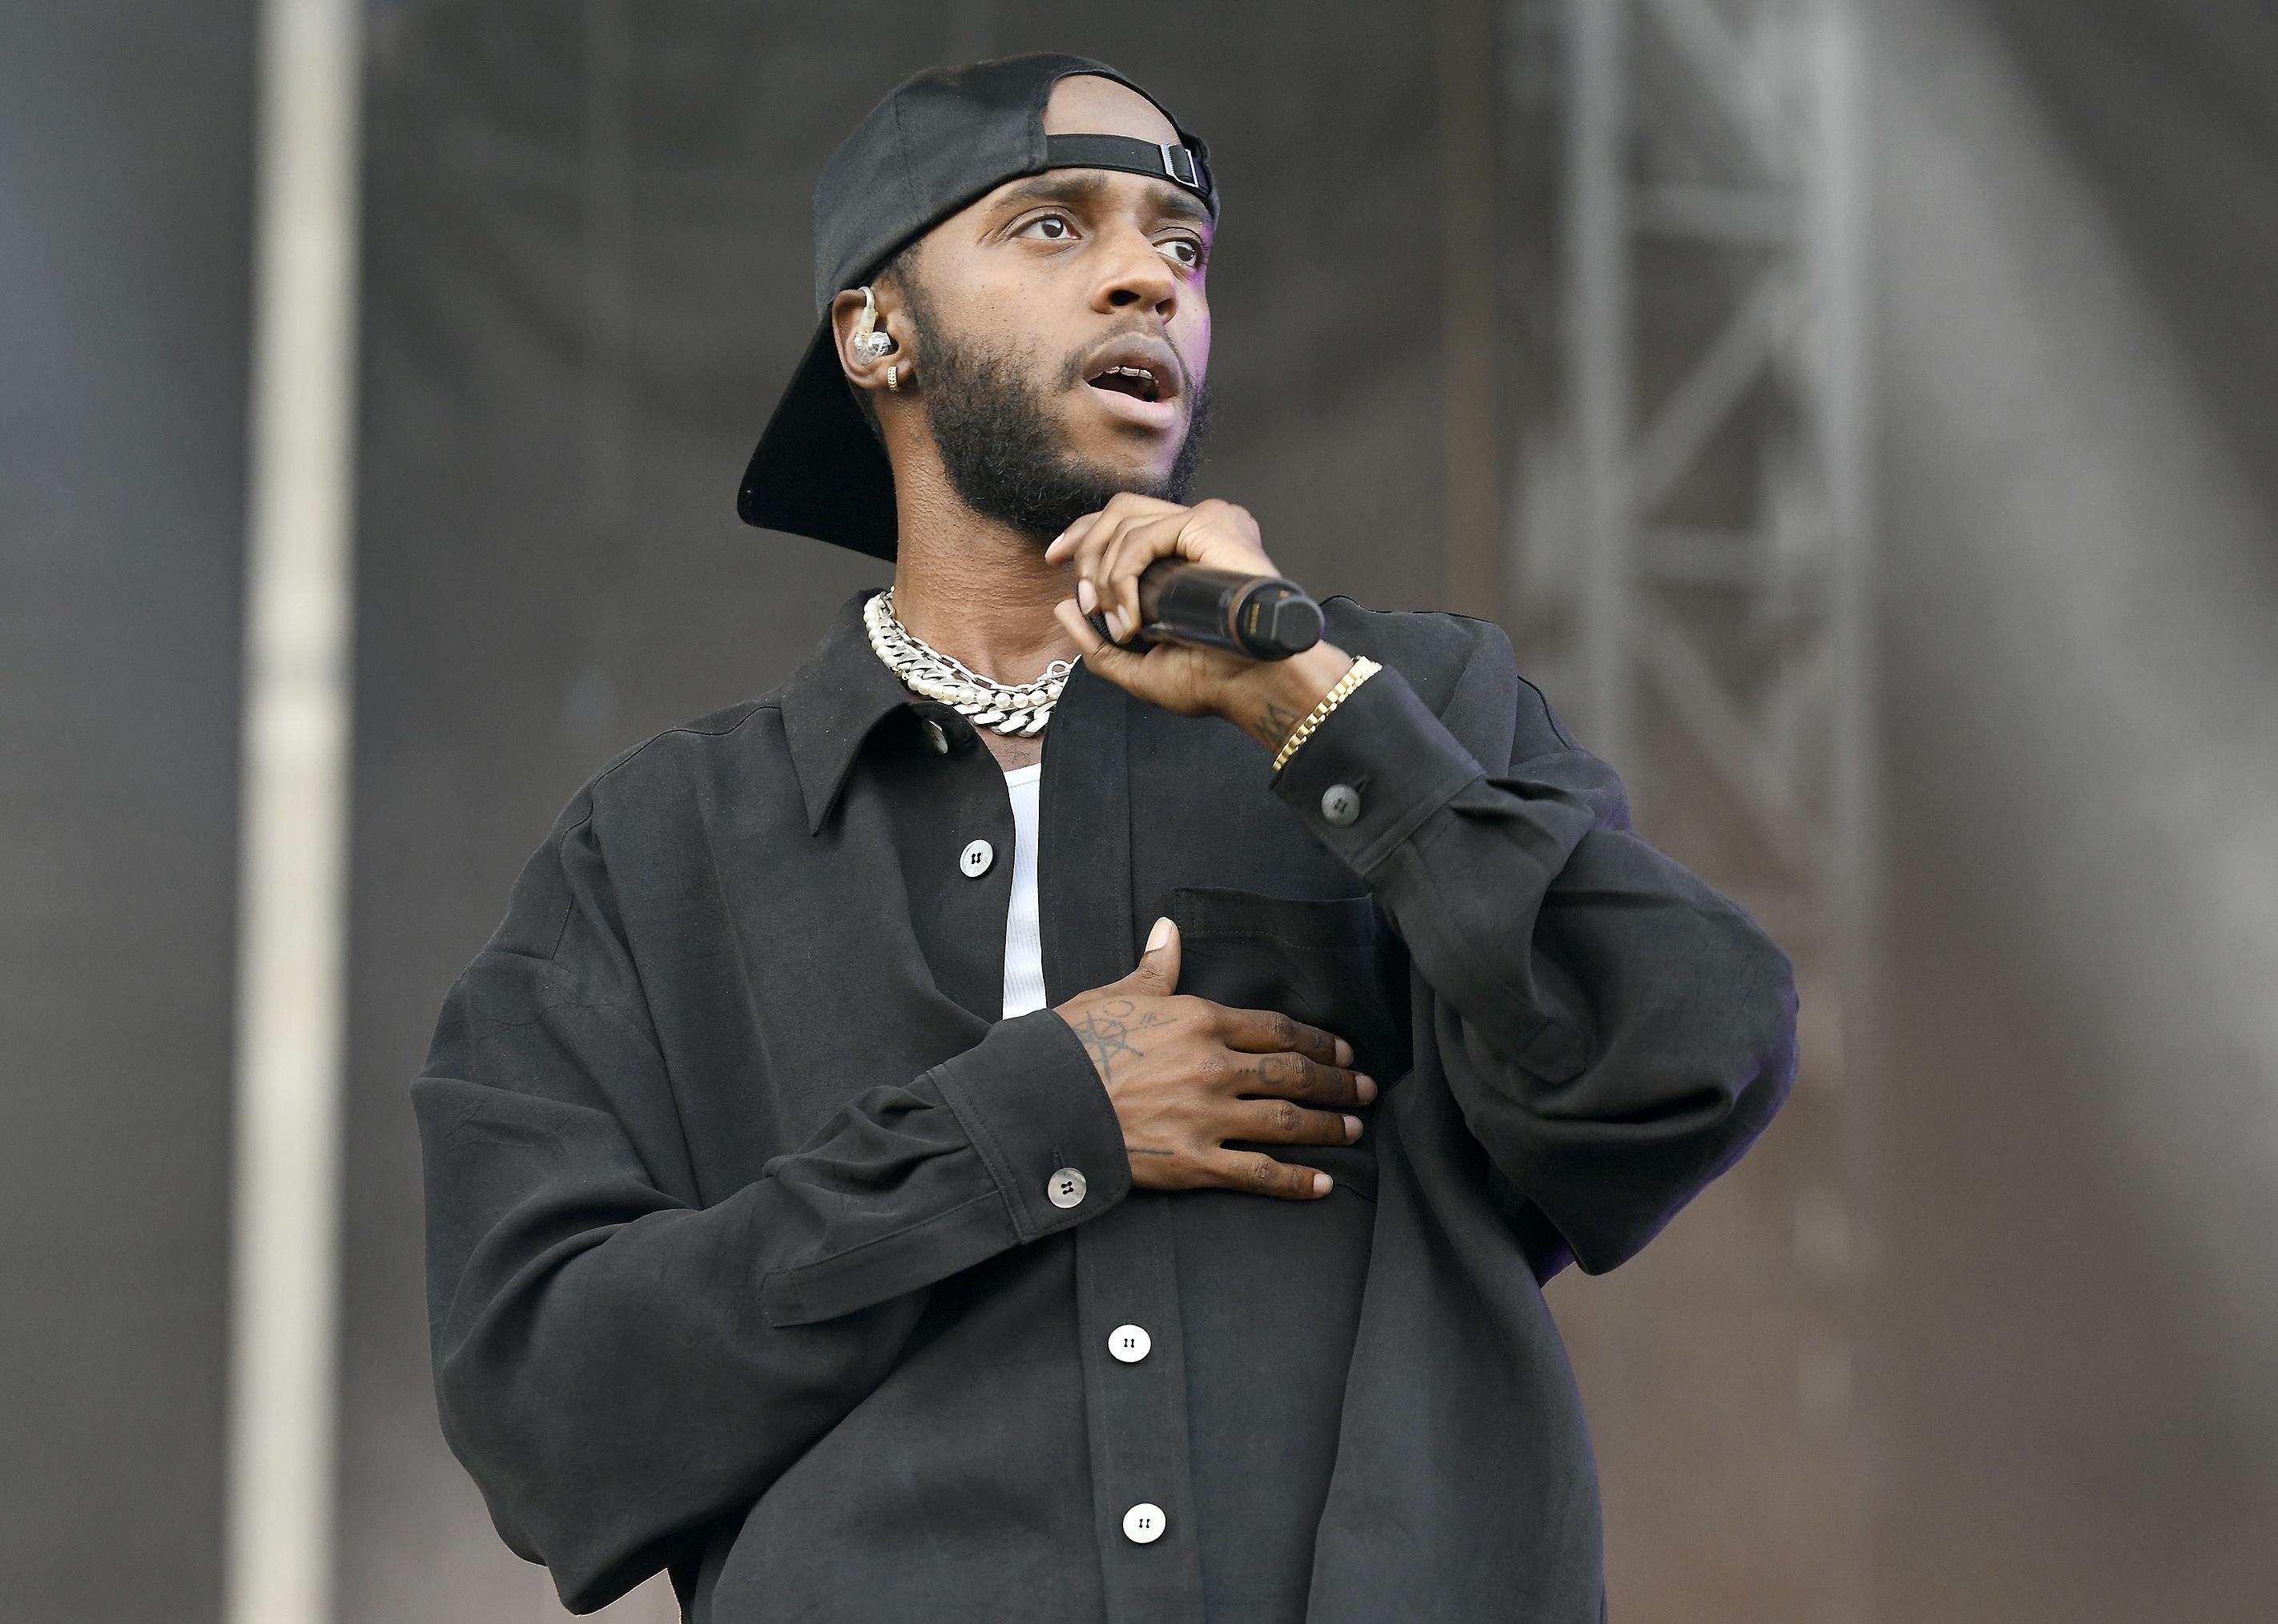 6lack performing in all black.